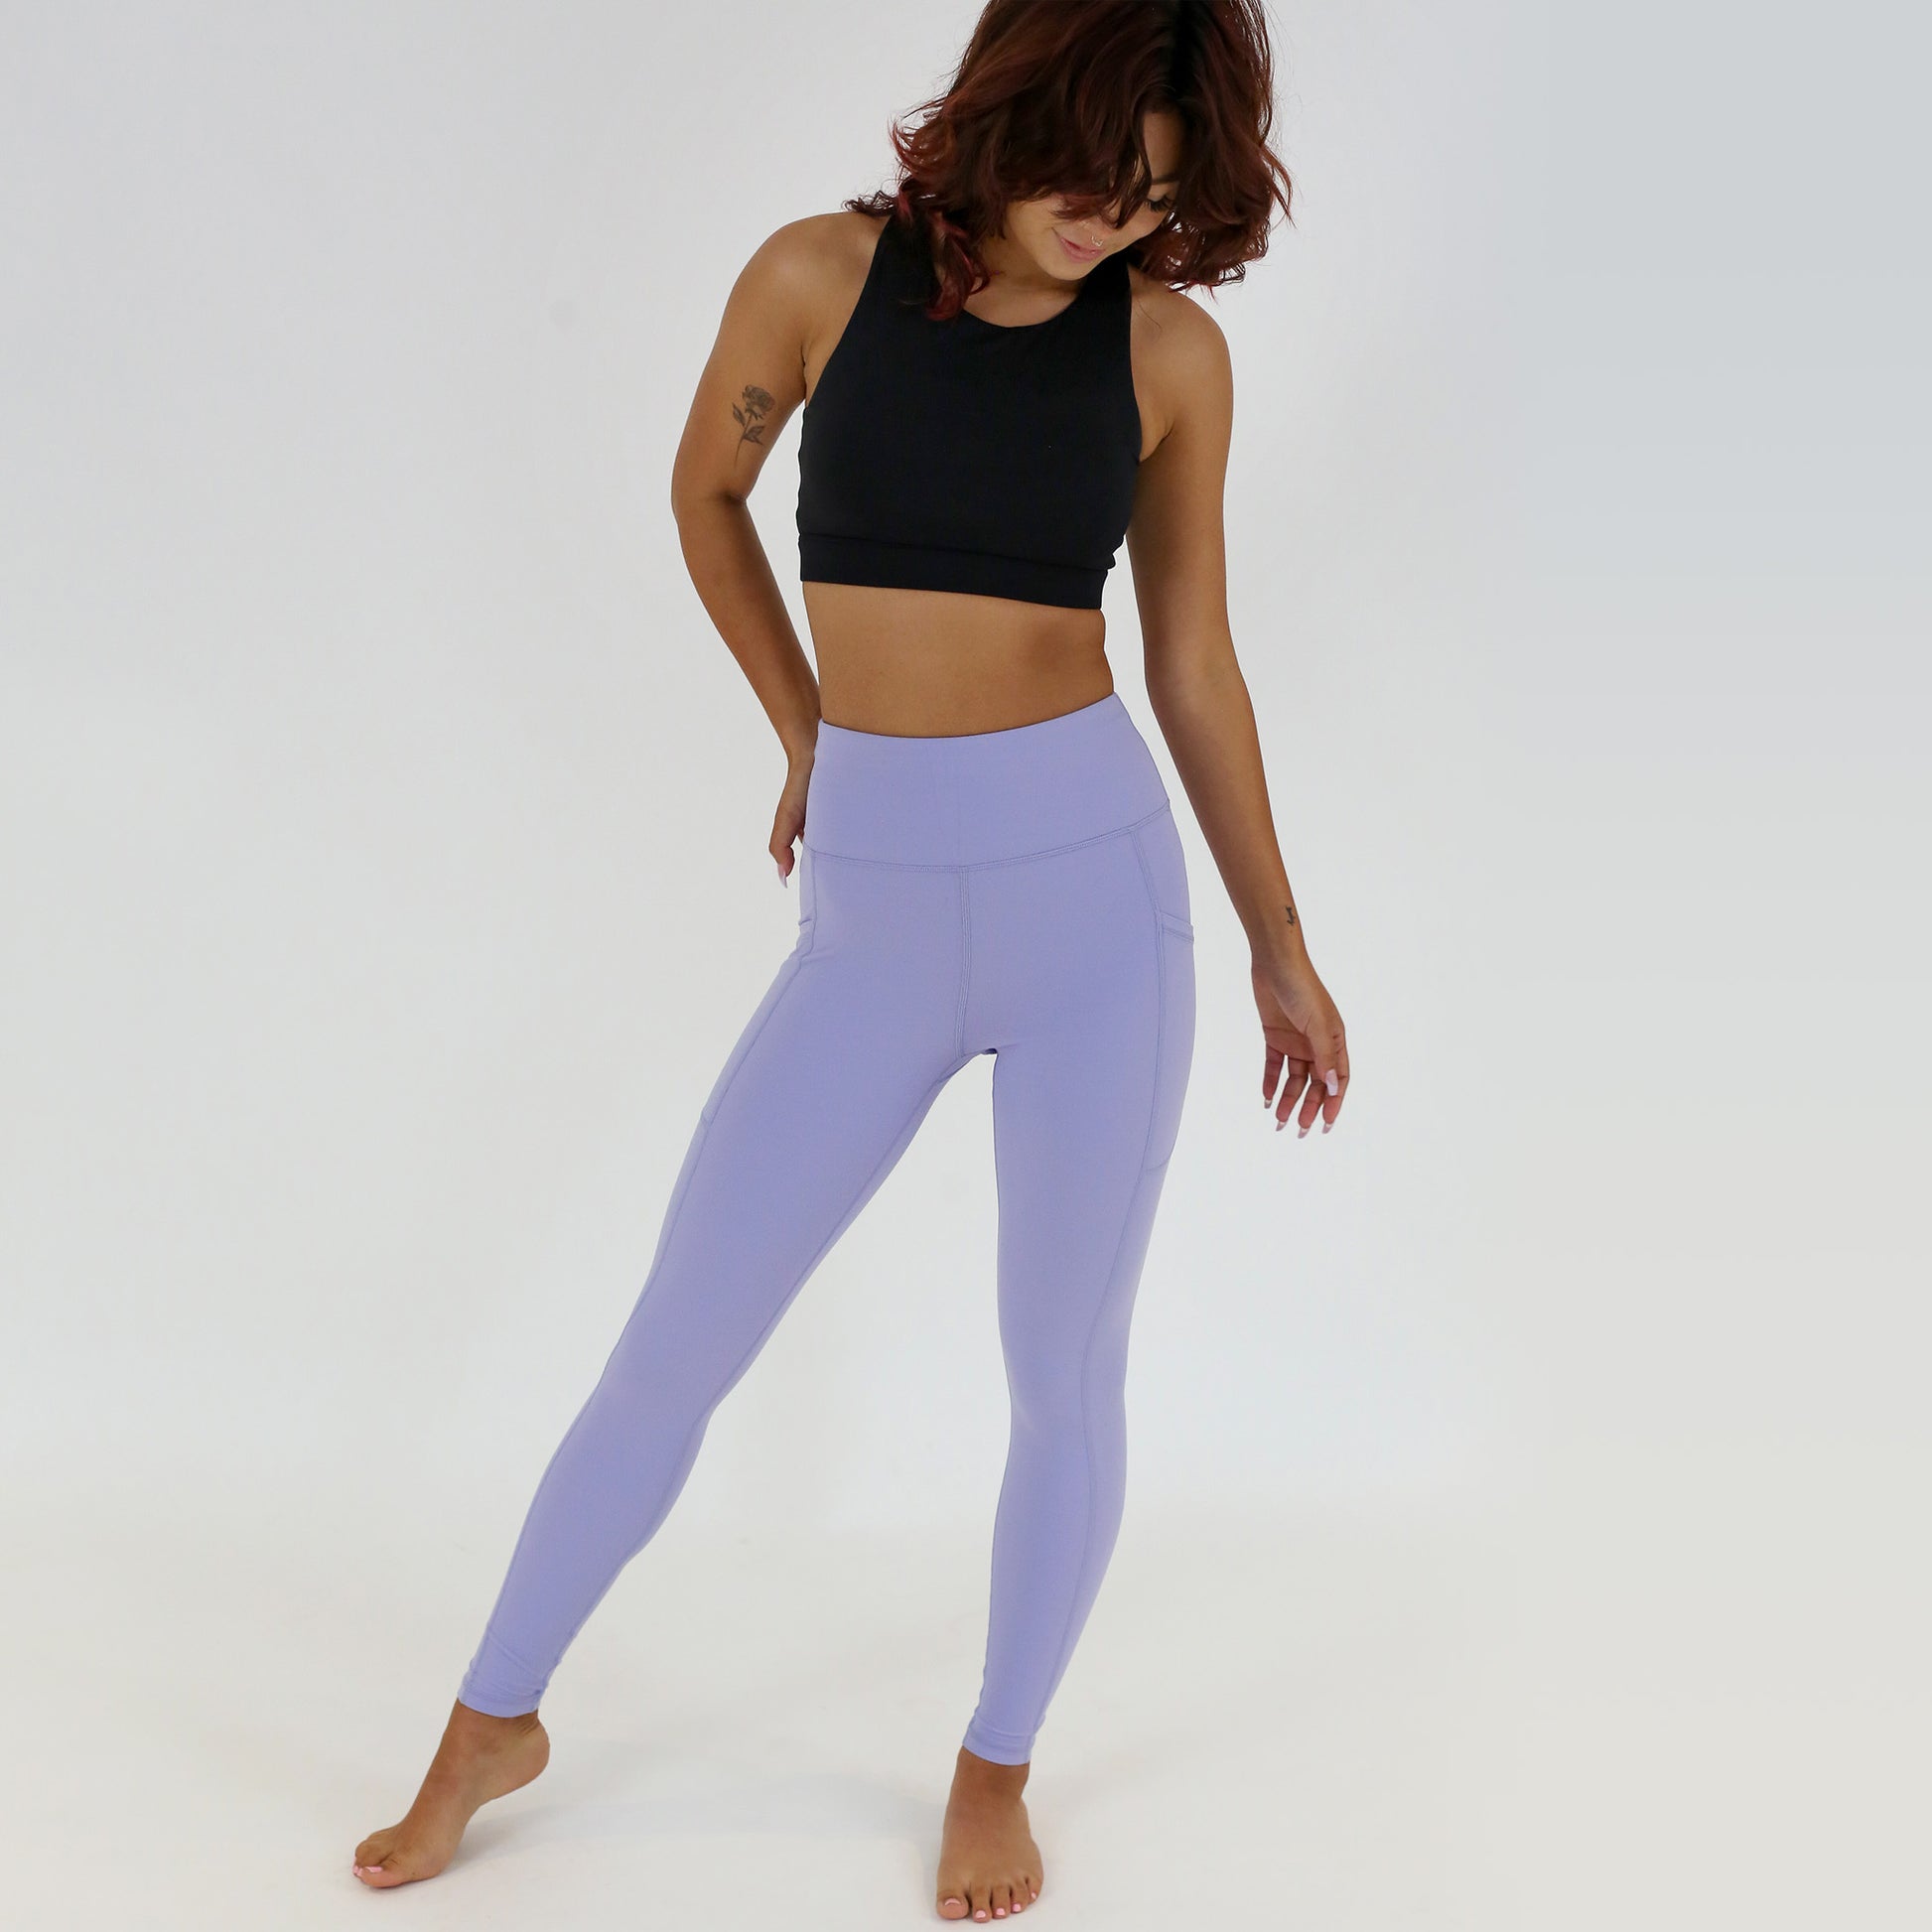 Purple High-Rise Yoga/workout Leggings - XL - Pockets - New With